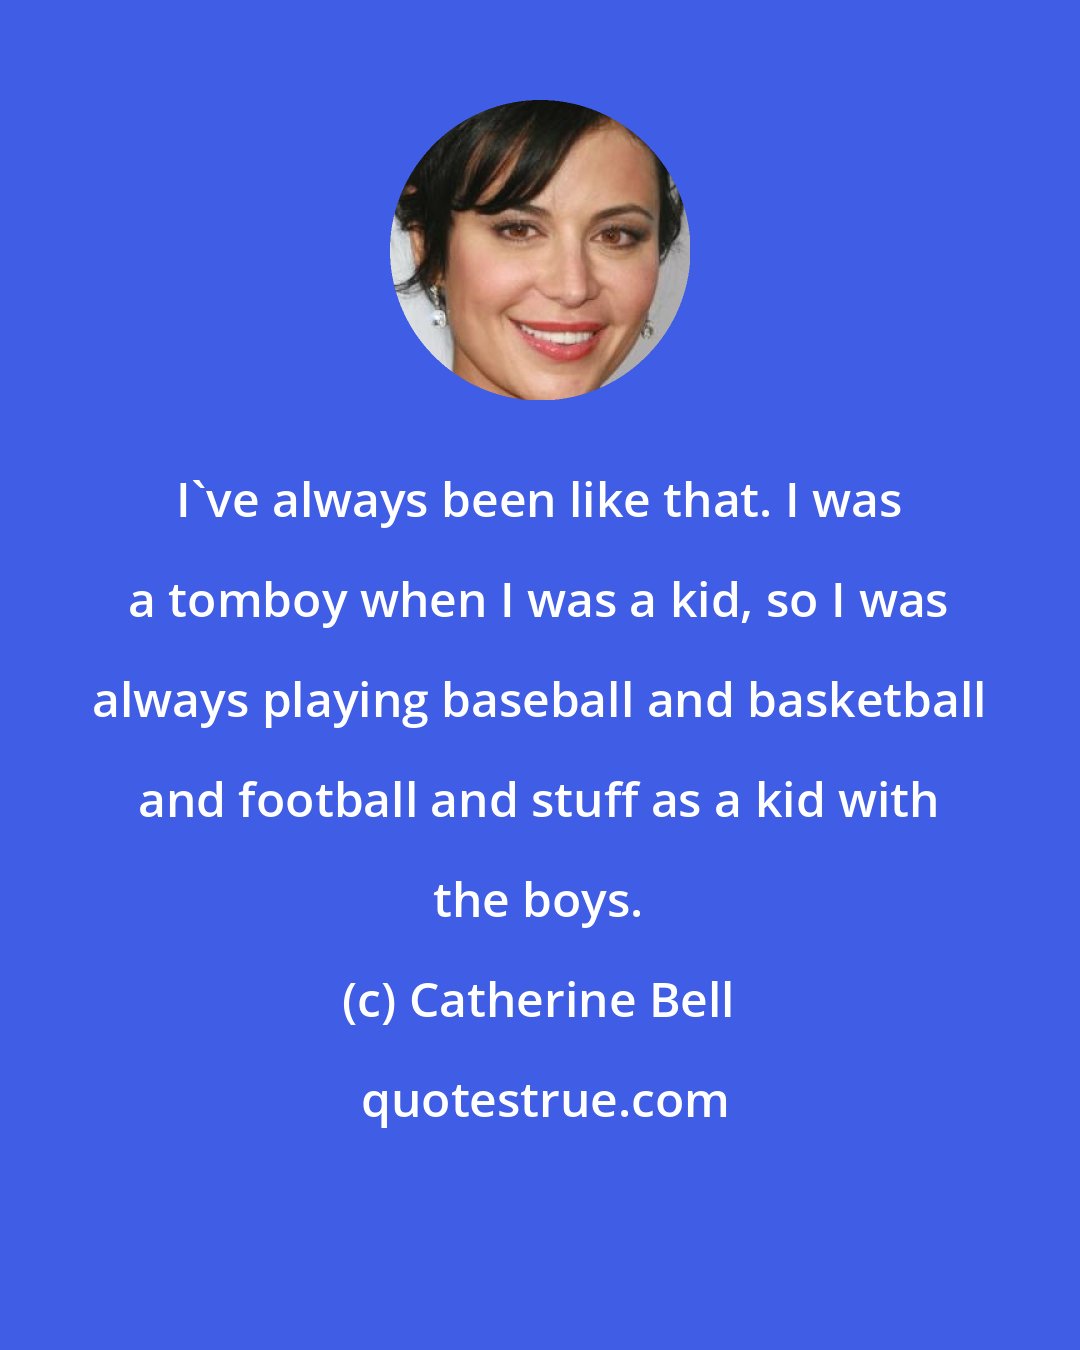 Catherine Bell: I've always been like that. I was a tomboy when I was a kid, so I was always playing baseball and basketball and football and stuff as a kid with the boys.